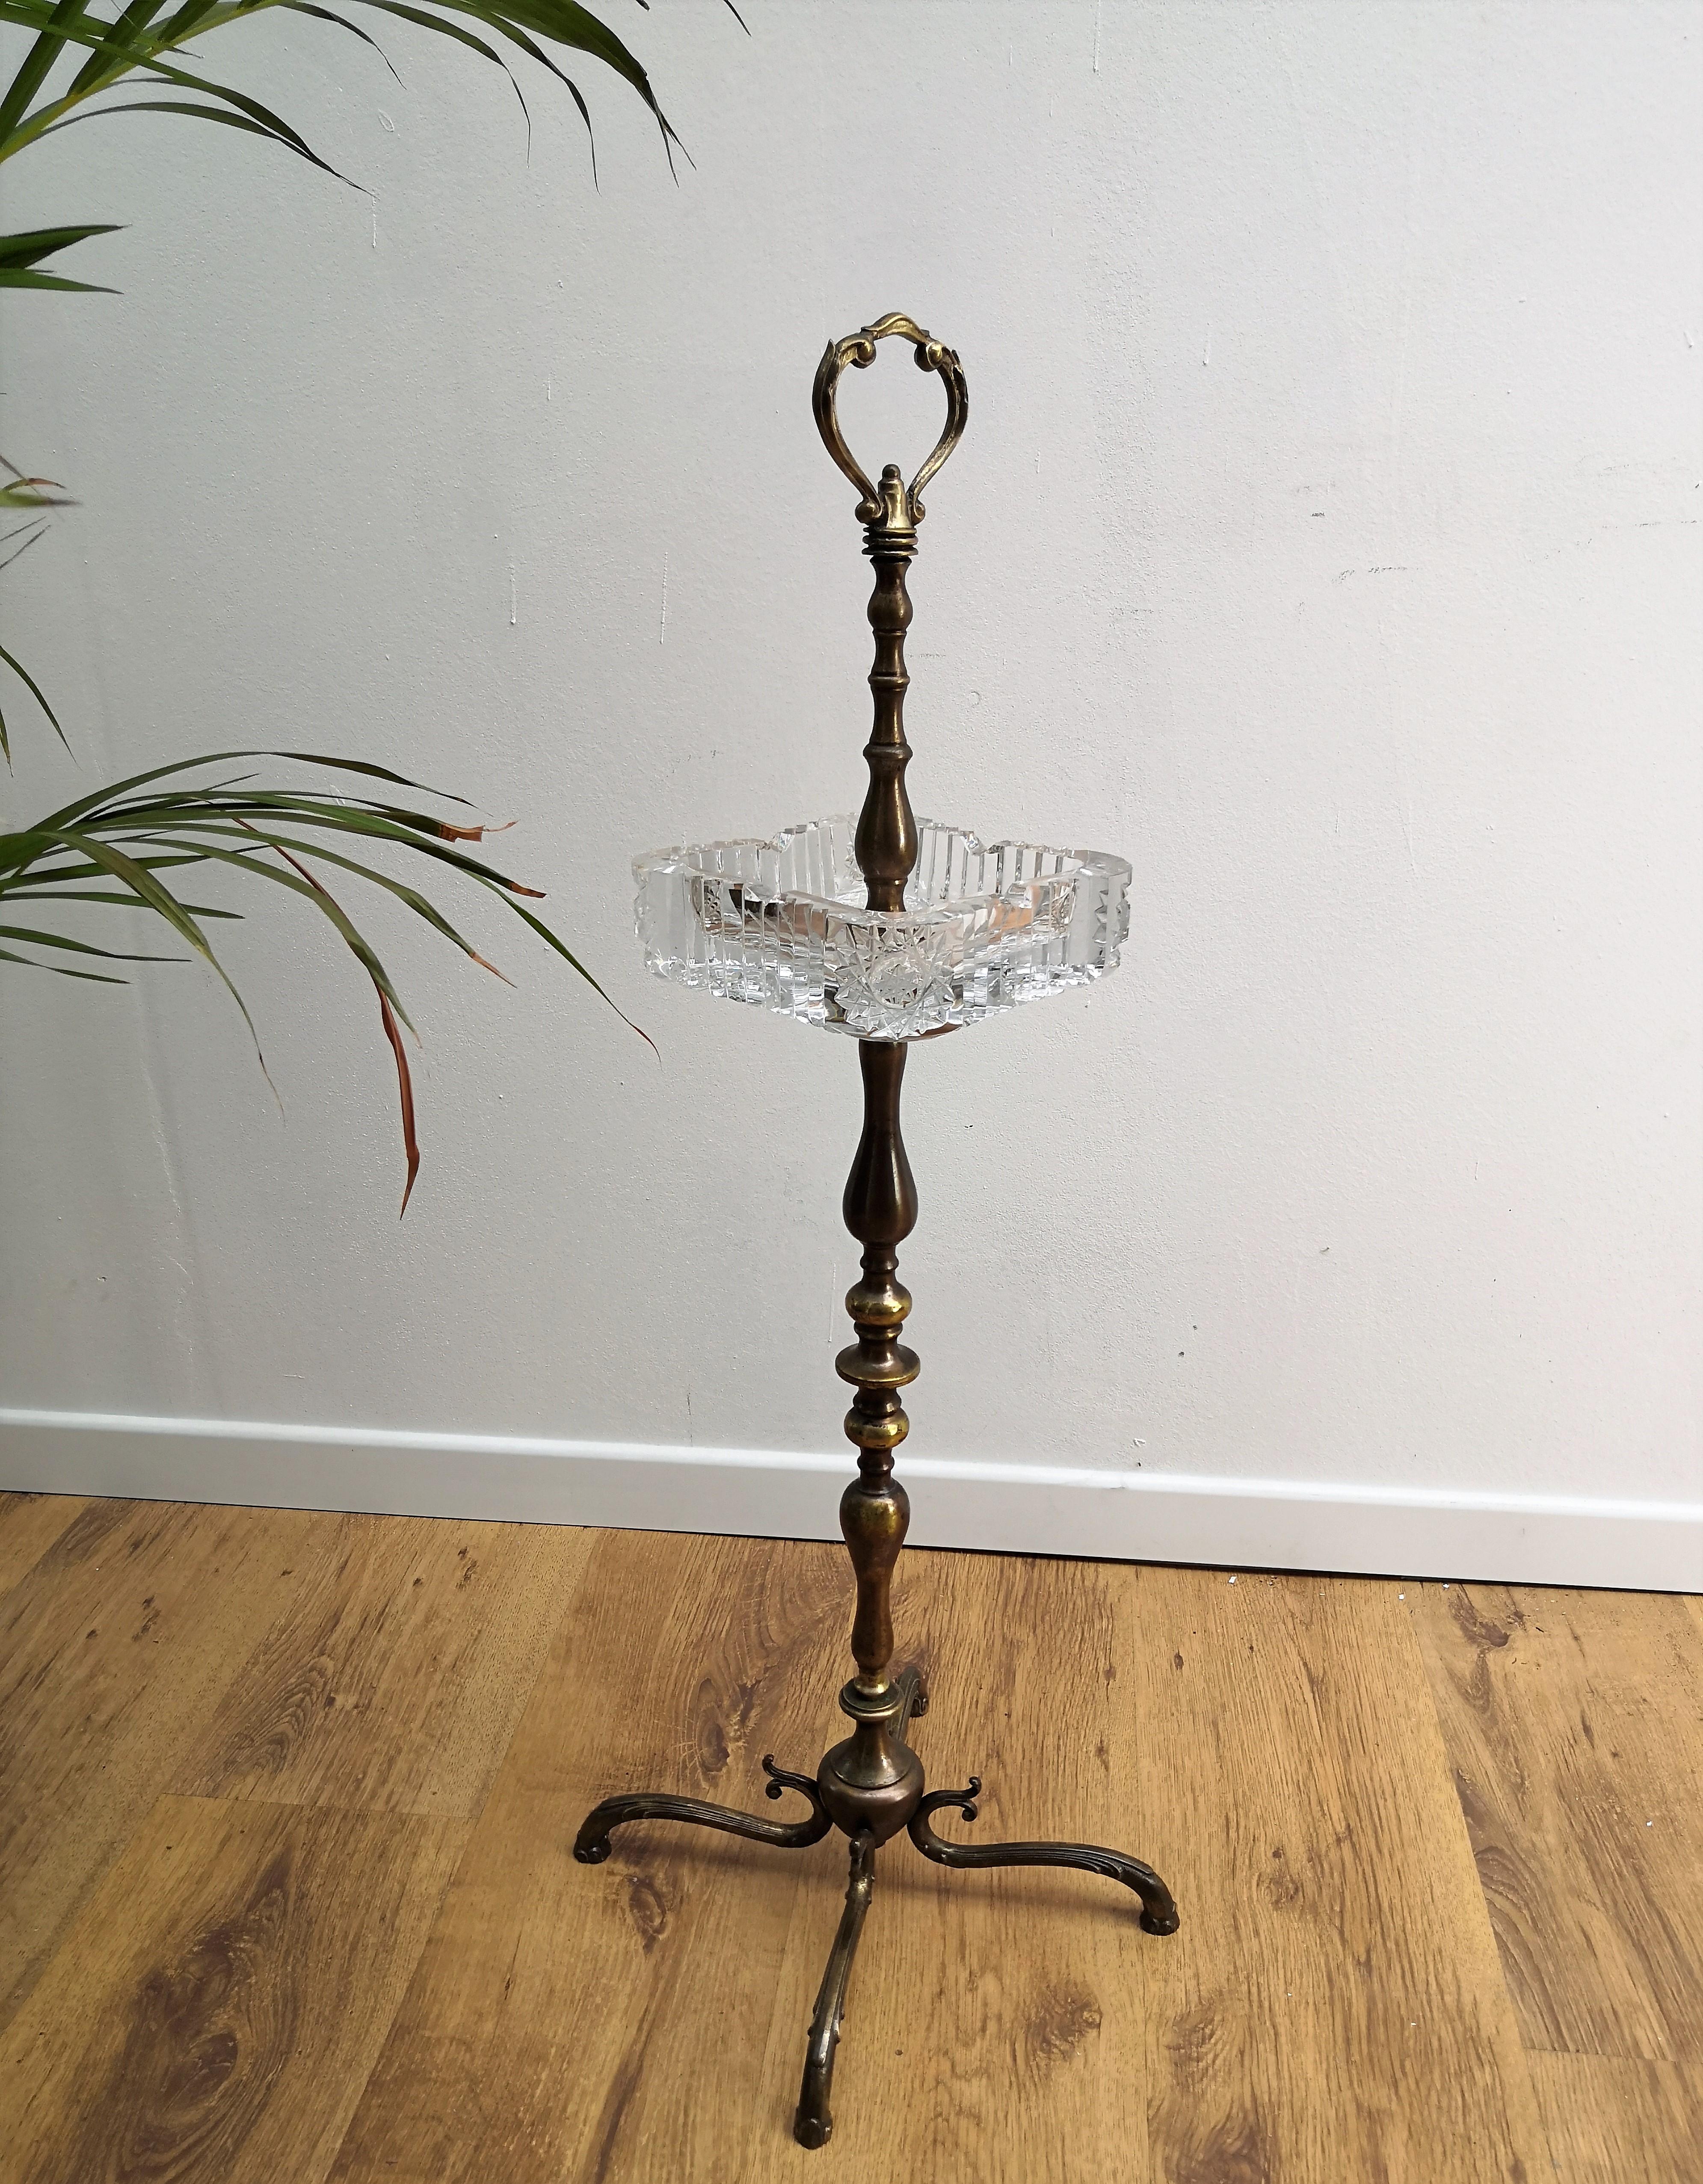 Beautiful brass and glass ashtray stand, manufactured in the 1980s in Italy. The conditions are excellent, with very minor fading and great timeless patina of the gilt brass.

A great piece that perfectly adds to every home decor the typical